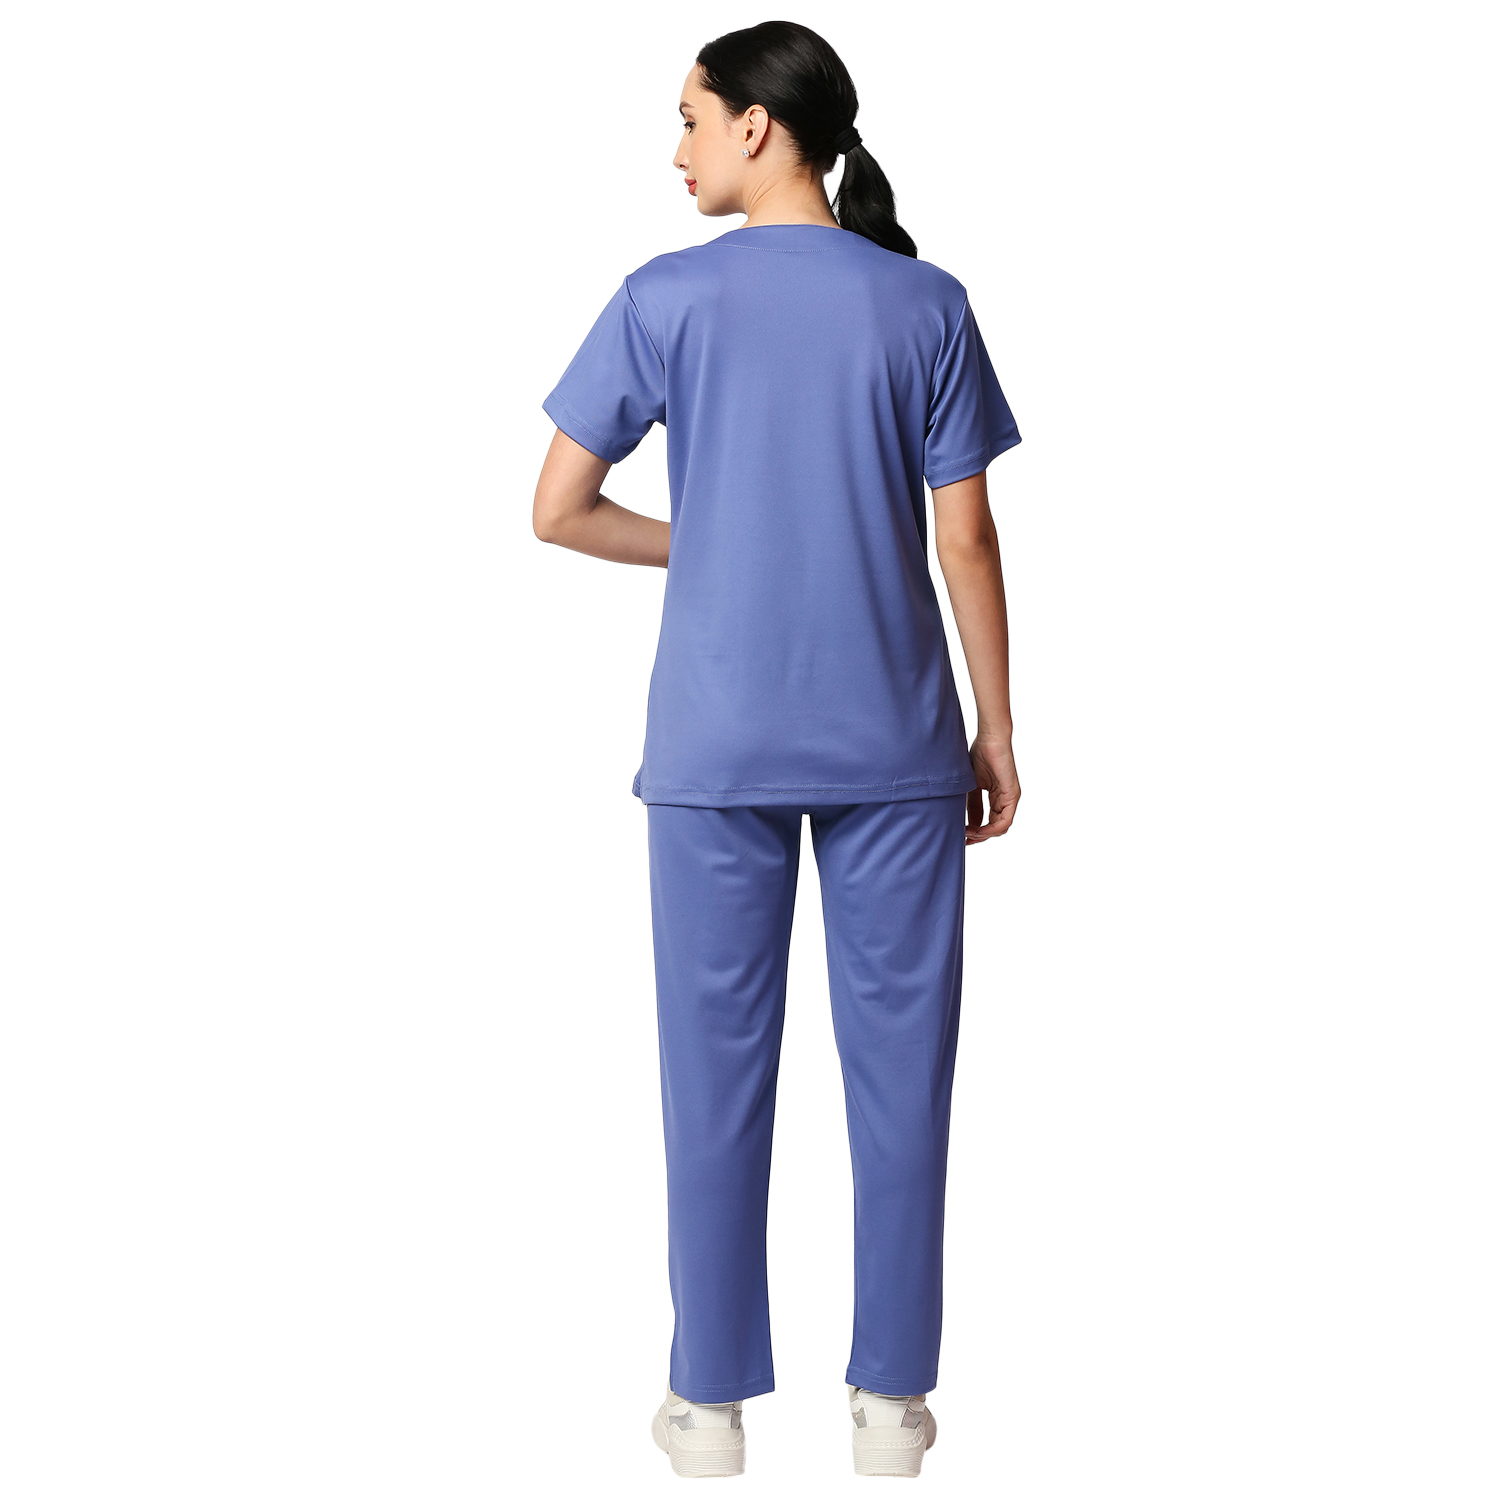 Buy Doctor Scrubs - Thermaissance